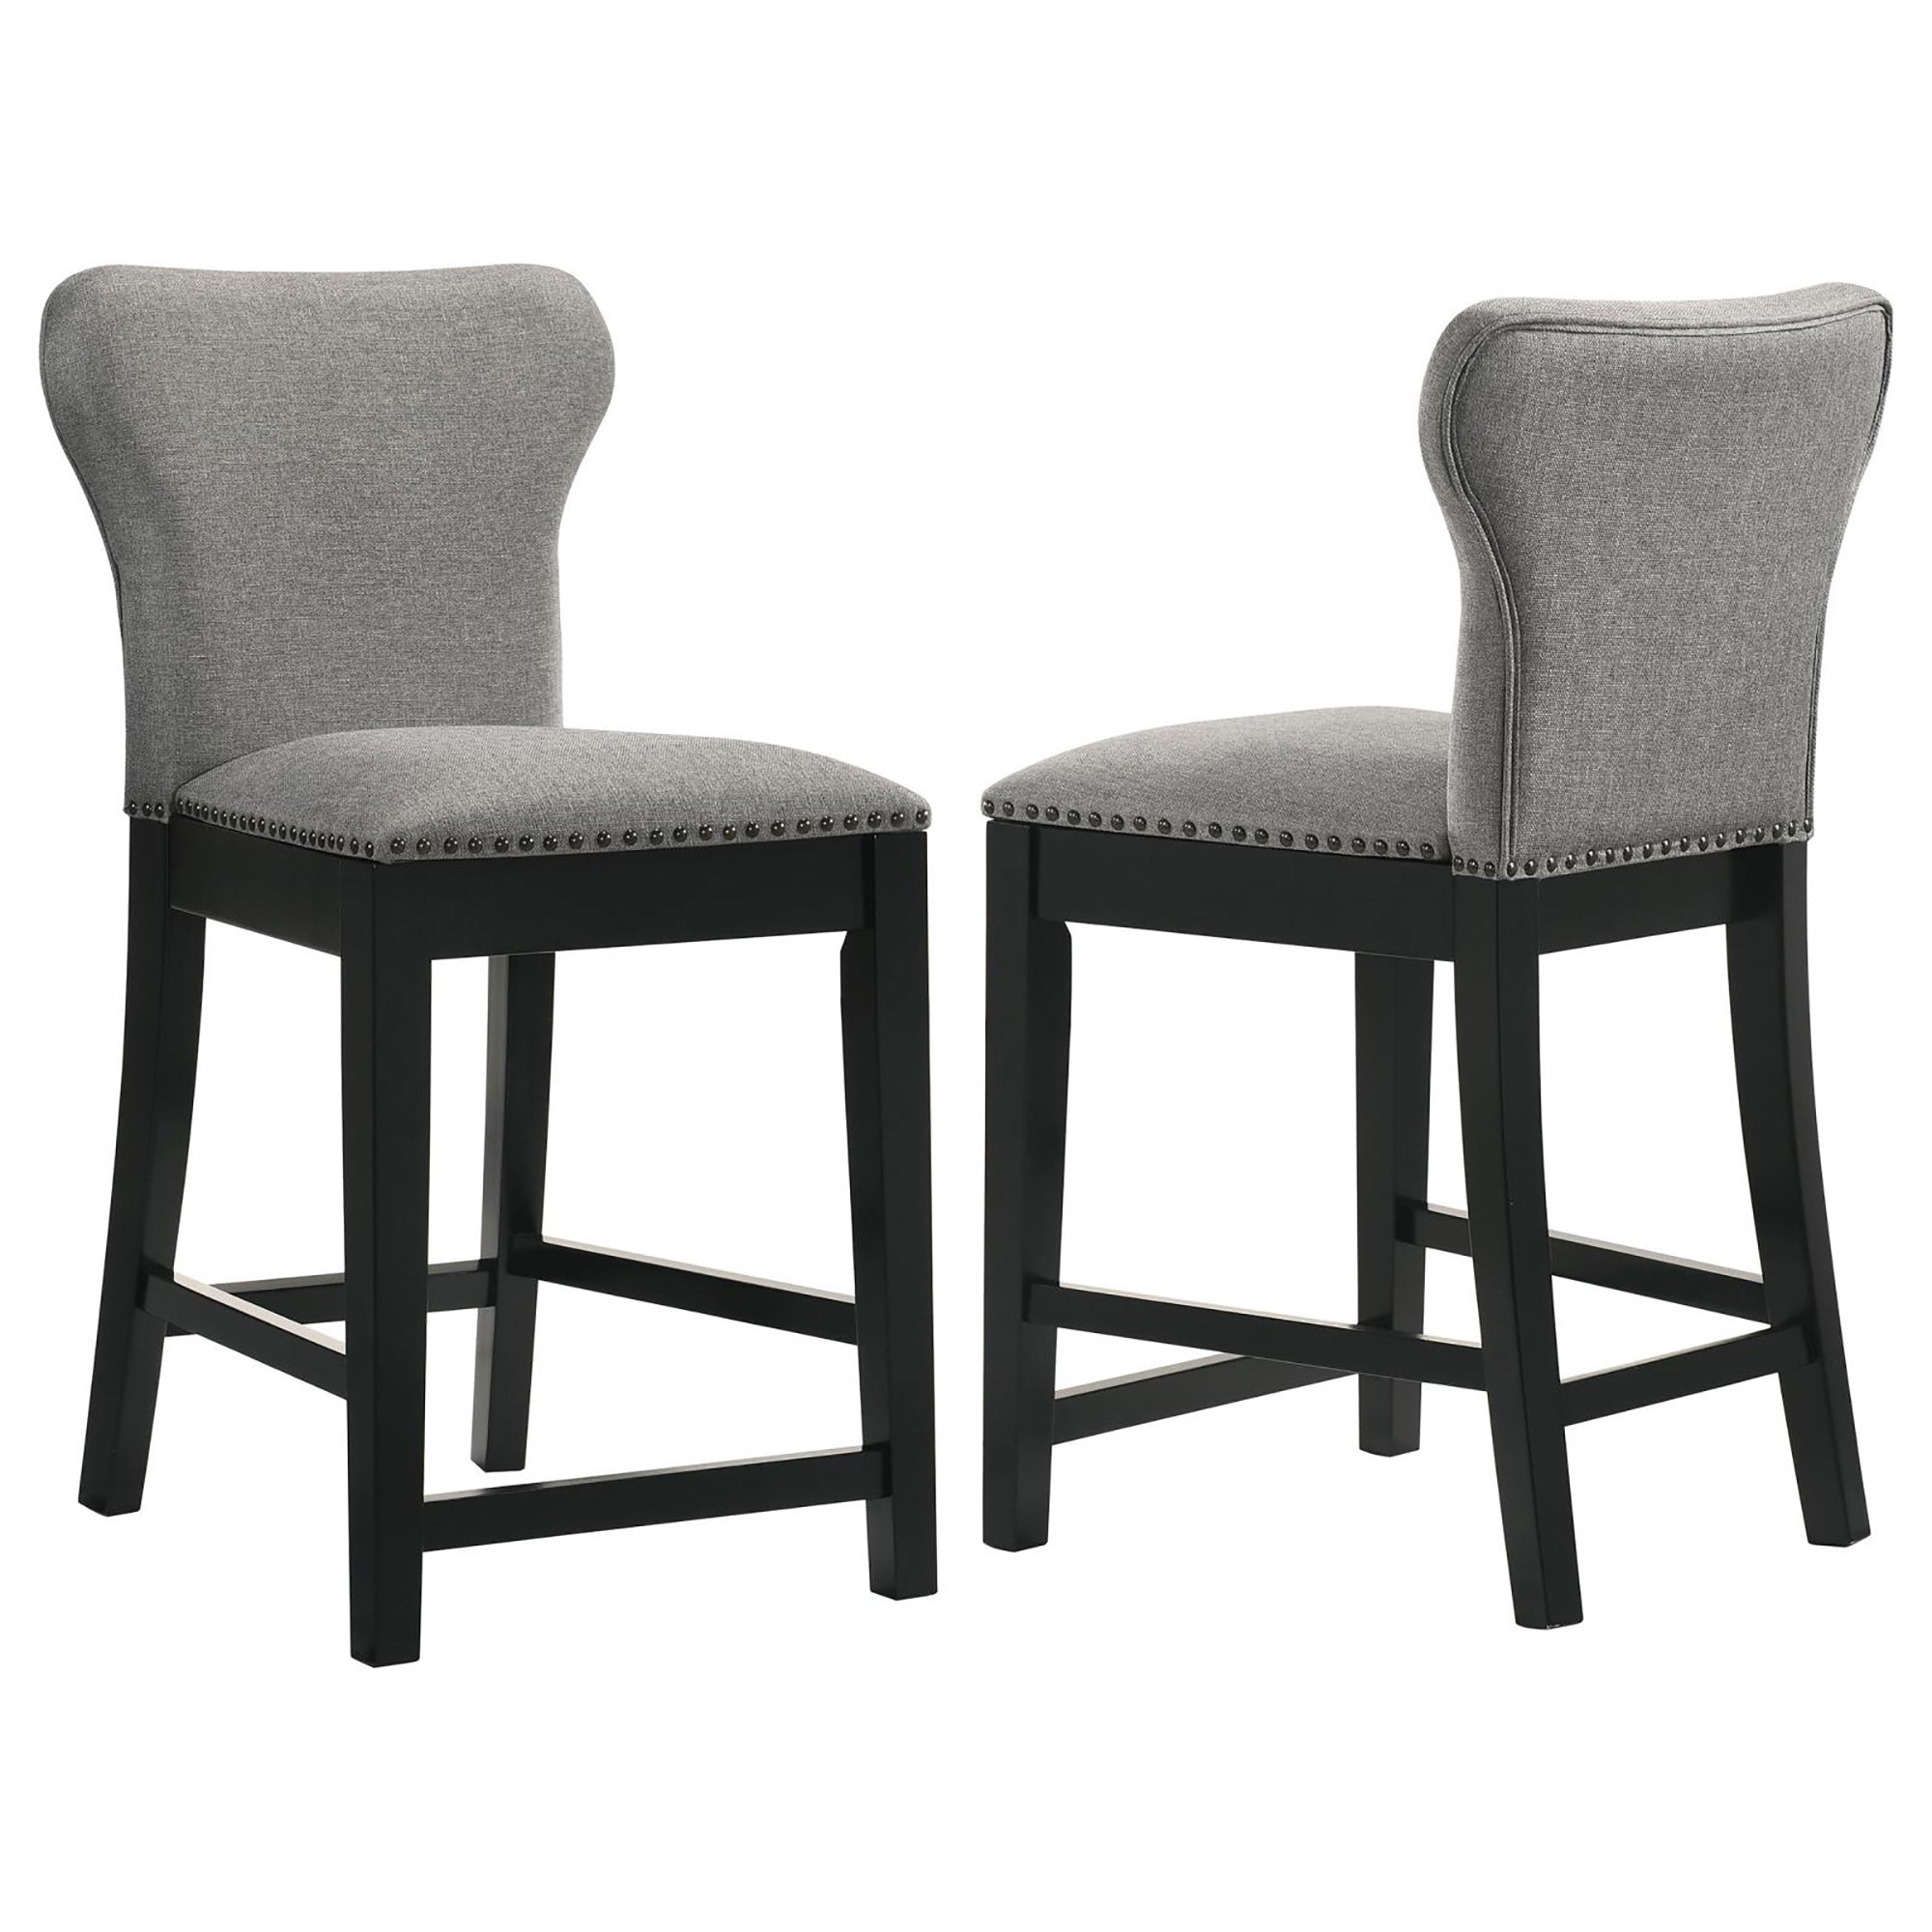 Grey and Black Stool with Nailhead Trim Set of 2 black-dining room-wipe clean-transitional-bar